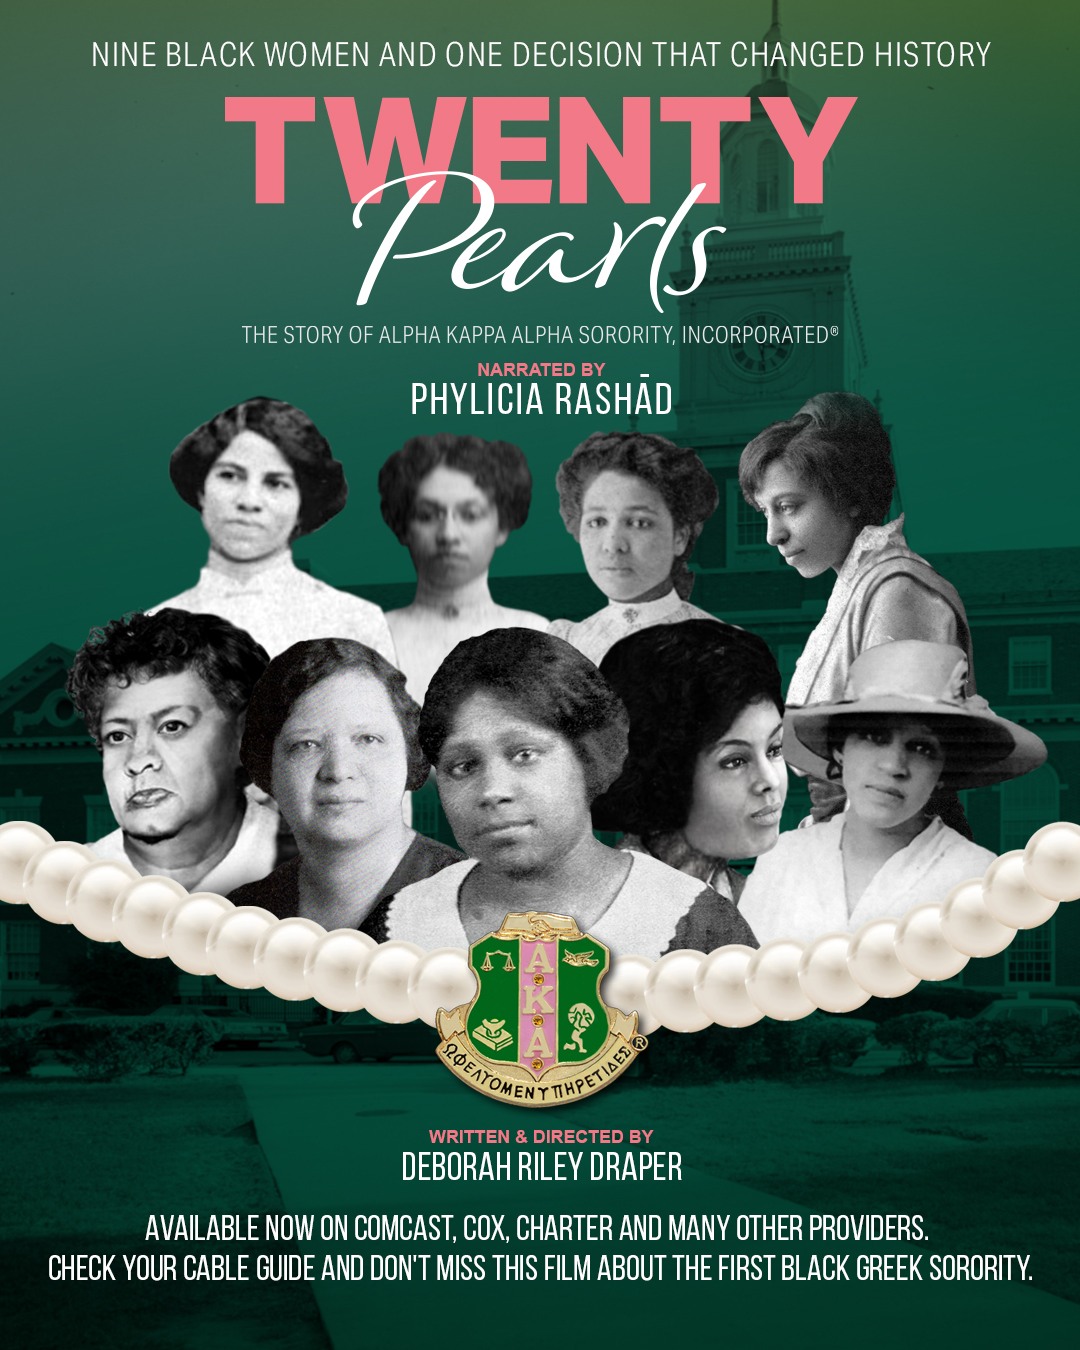 The film also features interviews with International President and CEO of Alpha Kappa Alpha Sorority, Incorporated®️ Dr. Glenda Baskin Glover, Miss Universe Ireland Fionnghuala O'Reilly, Smithsonian Secretary Lonnie Bunch, Anna Eleanor Roosevelt Fierst, and many more.